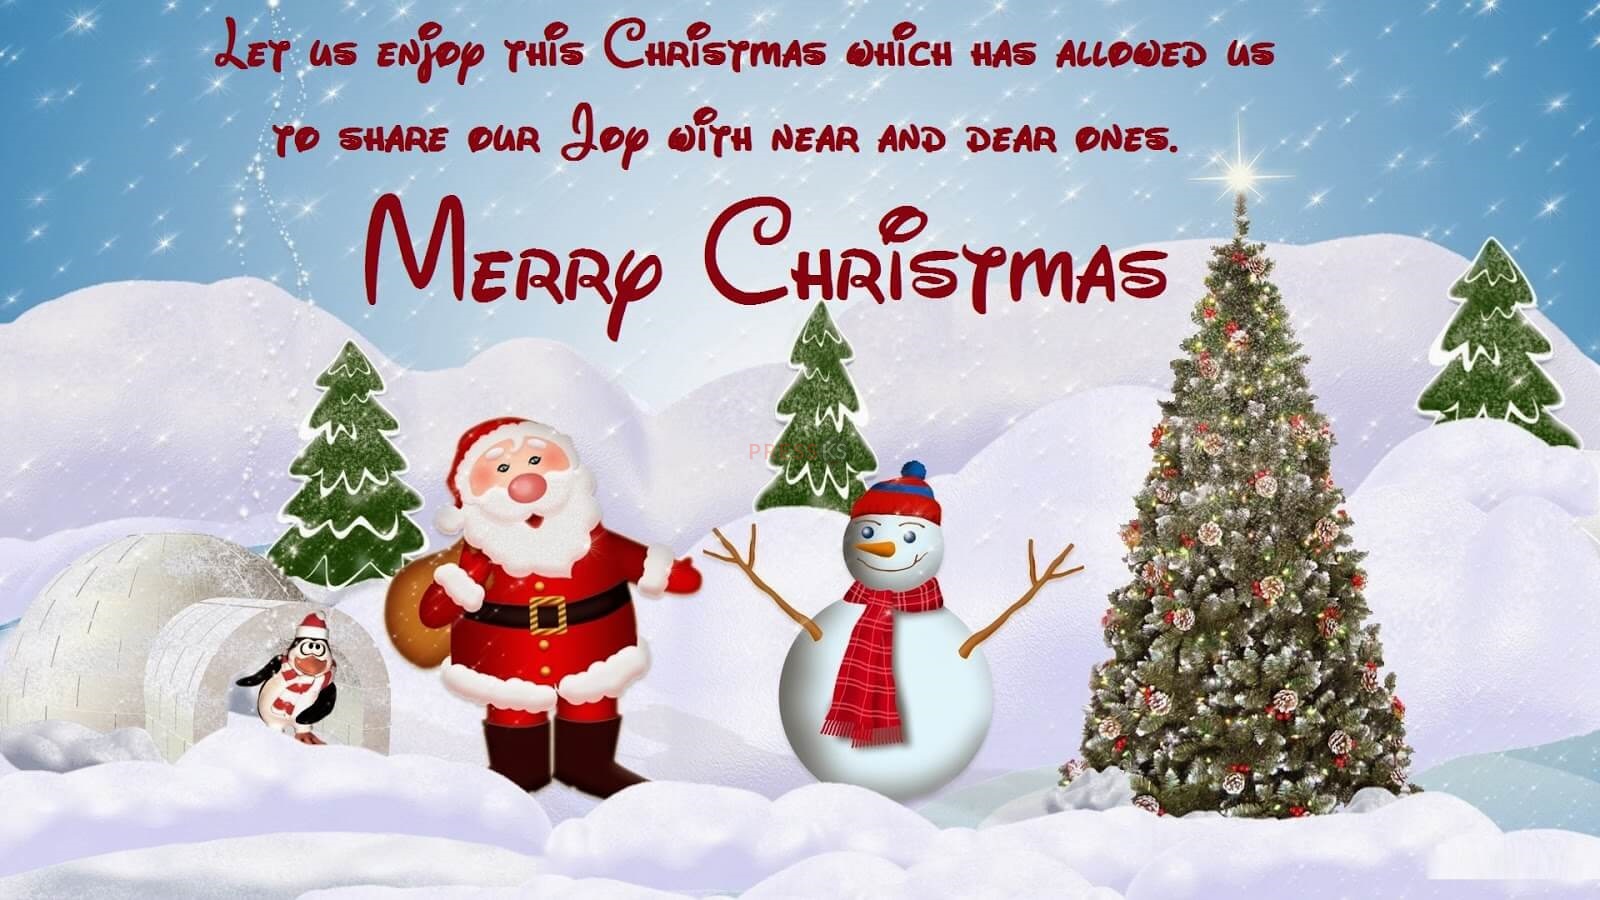 2016 Merry Christmas Image Wallpaper Picture Wishes 4 National School